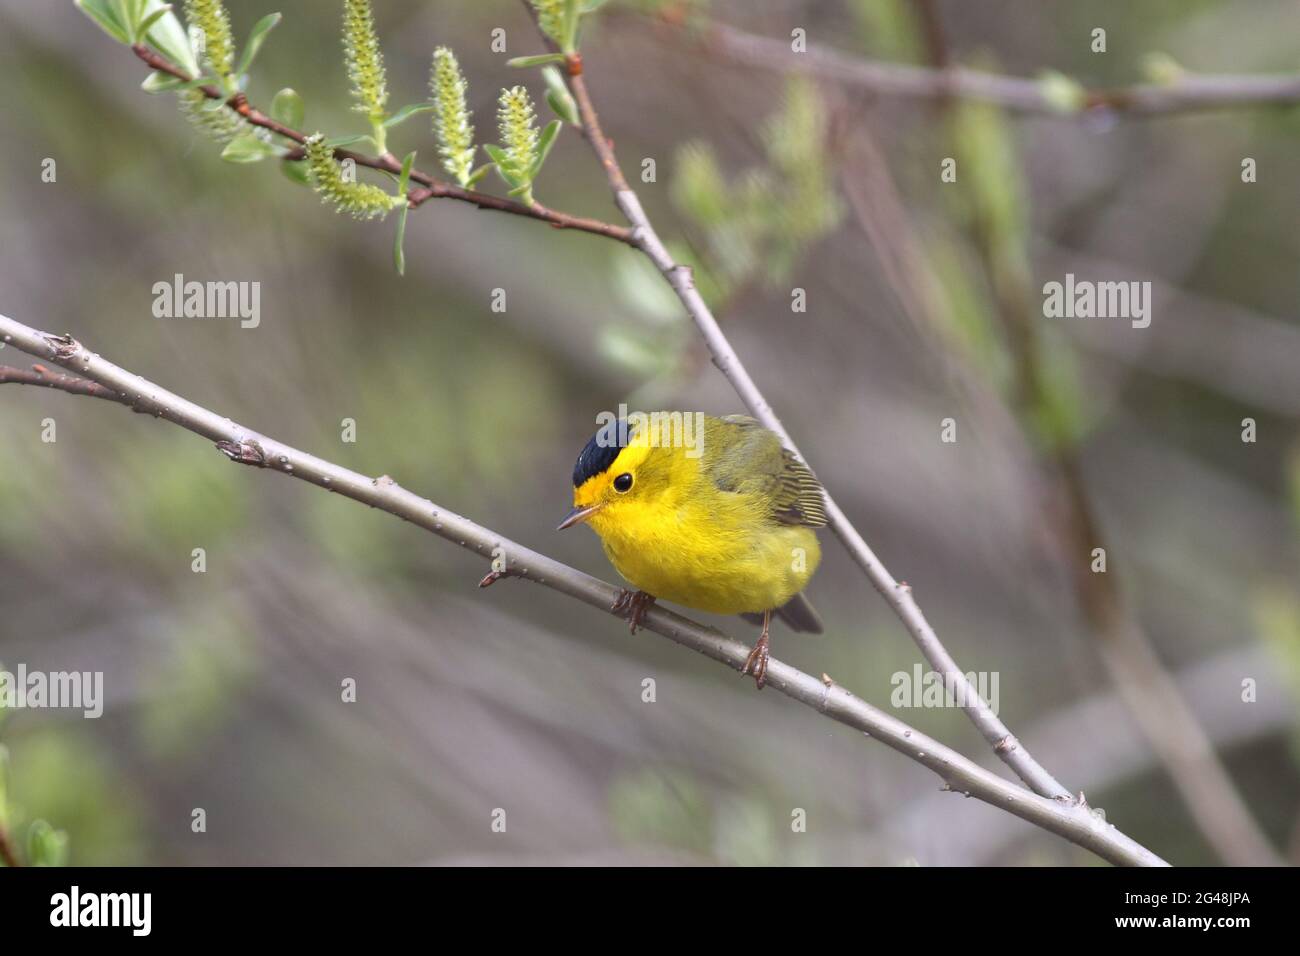 A tiny, bright yellow Wilson's Warbler with a black crown stops his rapid and frenetic flight to take a brief rest on a leafy branch Stock Photo